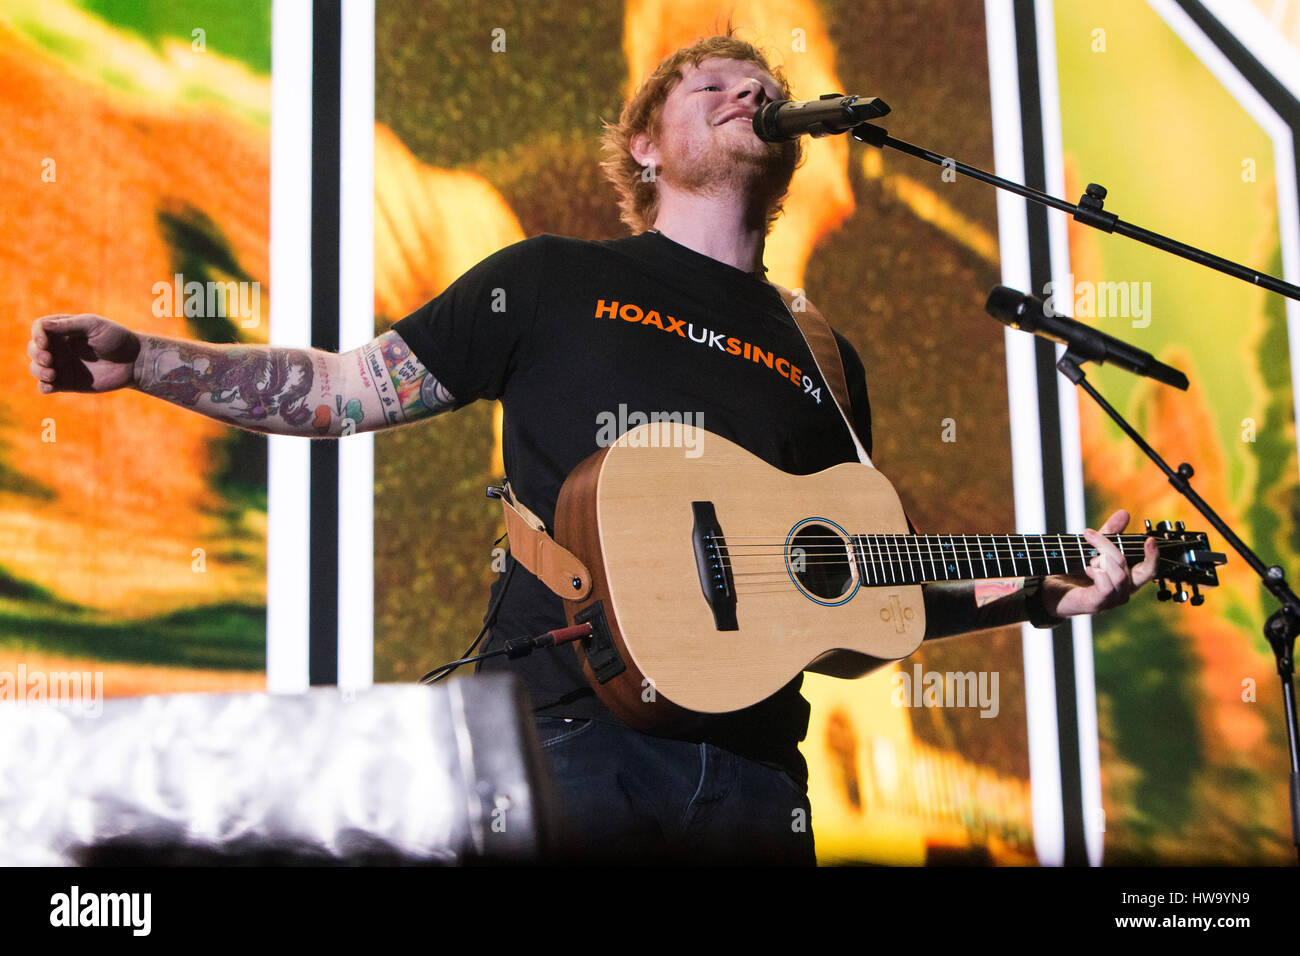 Turin Italy. 16th March 2017. The English singer-songwriter ED SHEERAN performs live on stage at PalaAlpitour during the 'Divide Tour 2017' Stock Photo